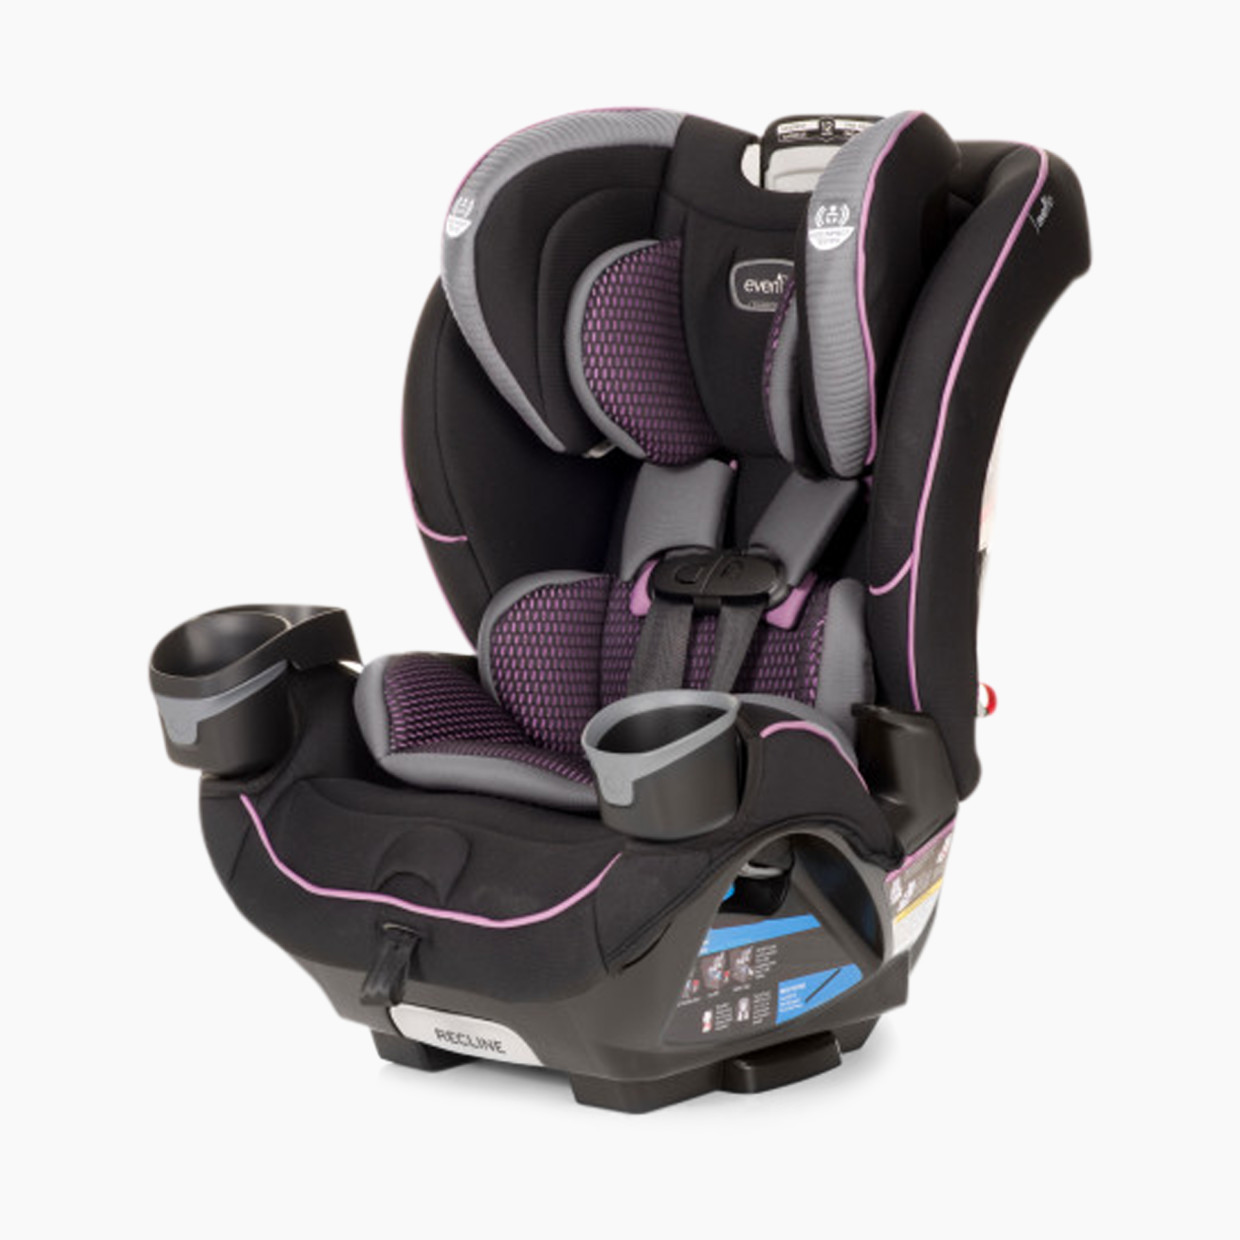 Evenflo Everyfit Convertible 4-in-1 Car Seat - Augusta.